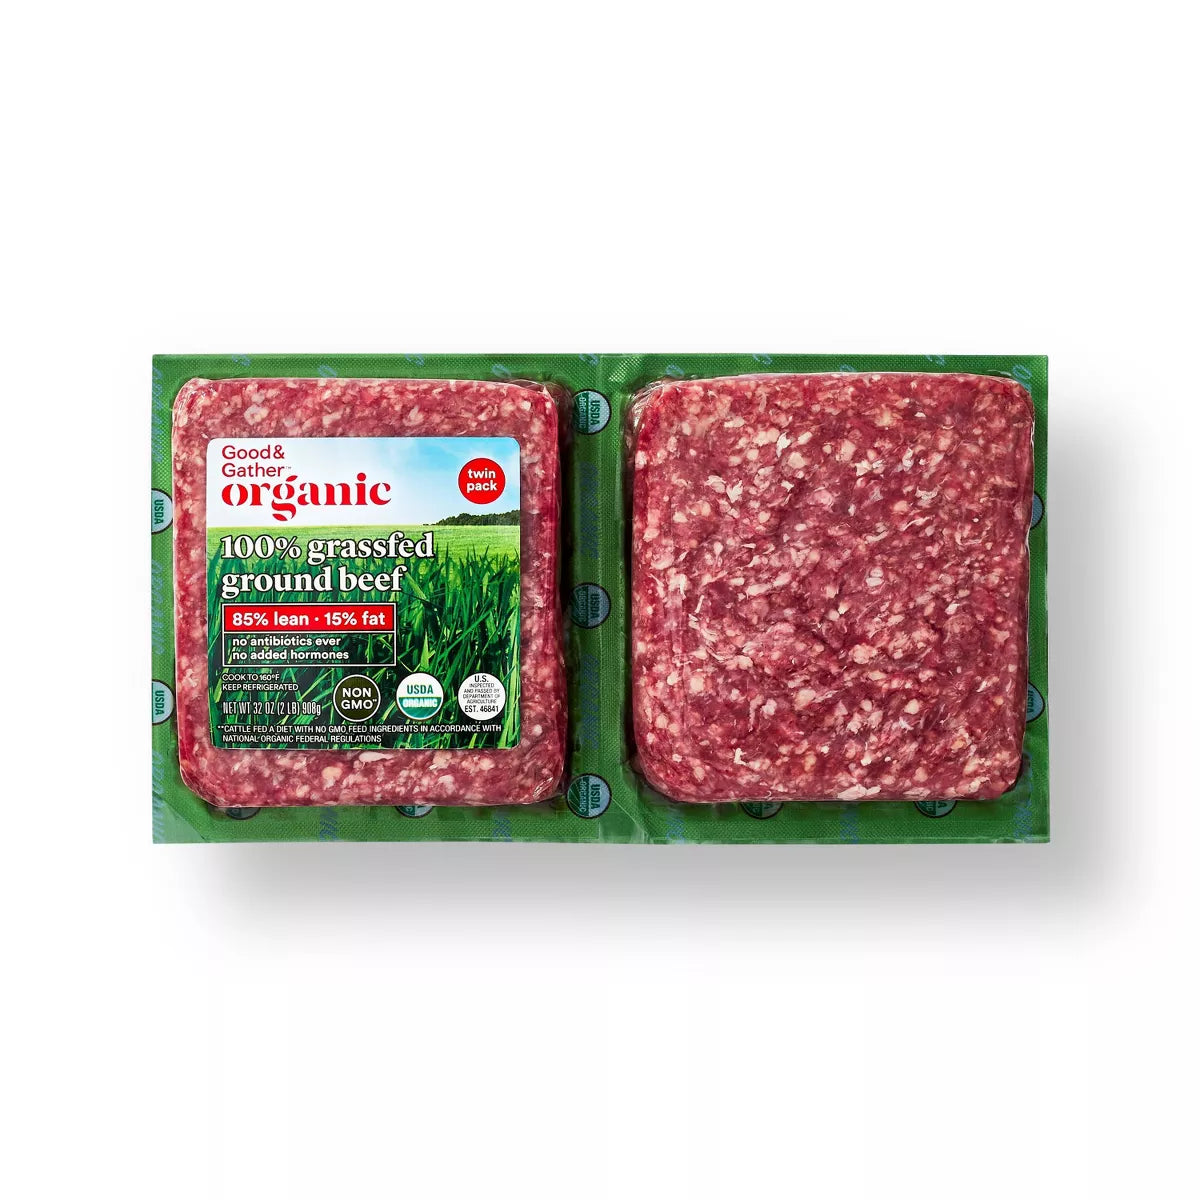 Good & Gather Organic Grassfed Ground Beef Twin Pack 2lb 1ct